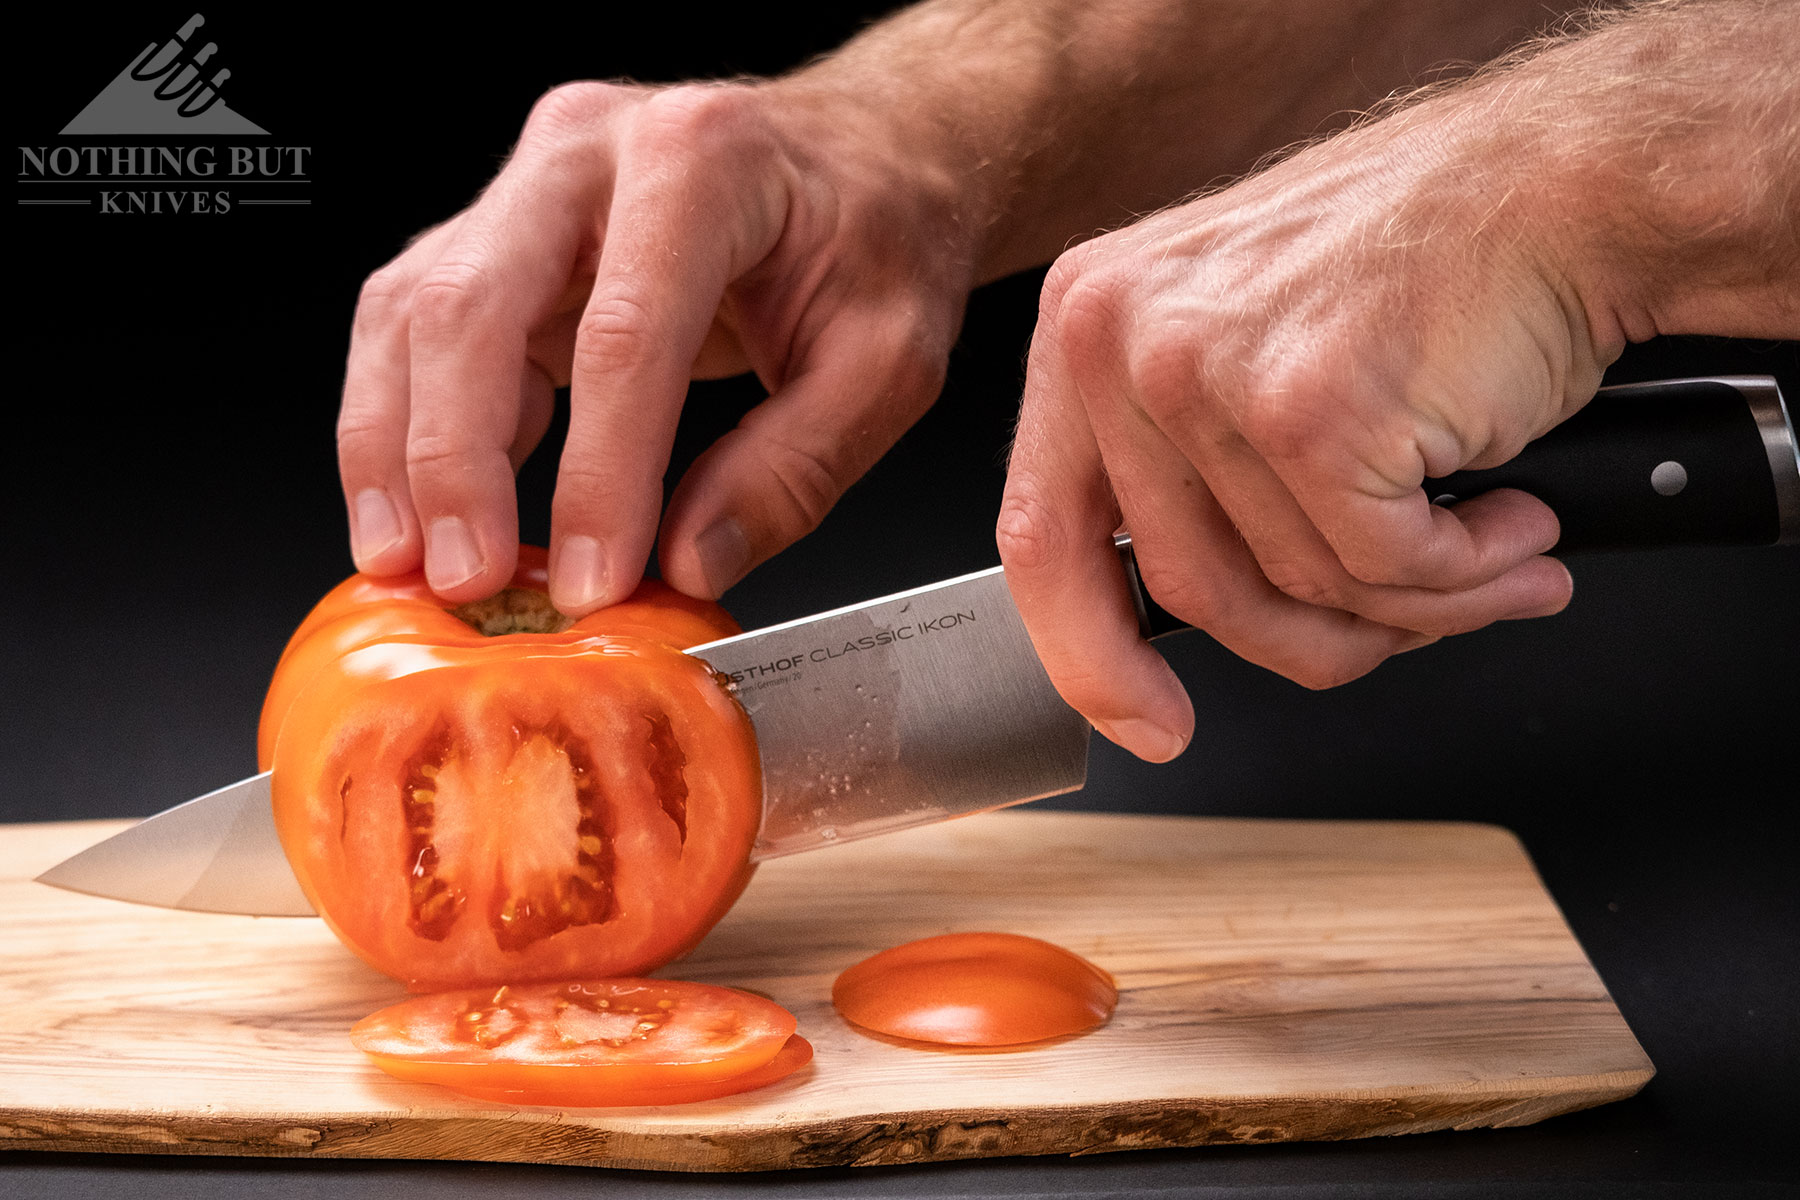 The Wusthof Classic Ikon 8 inch chef knife is a slightly cheaper alternative to the Zwilling By Kramer Euro Stainless Essential chef knife.